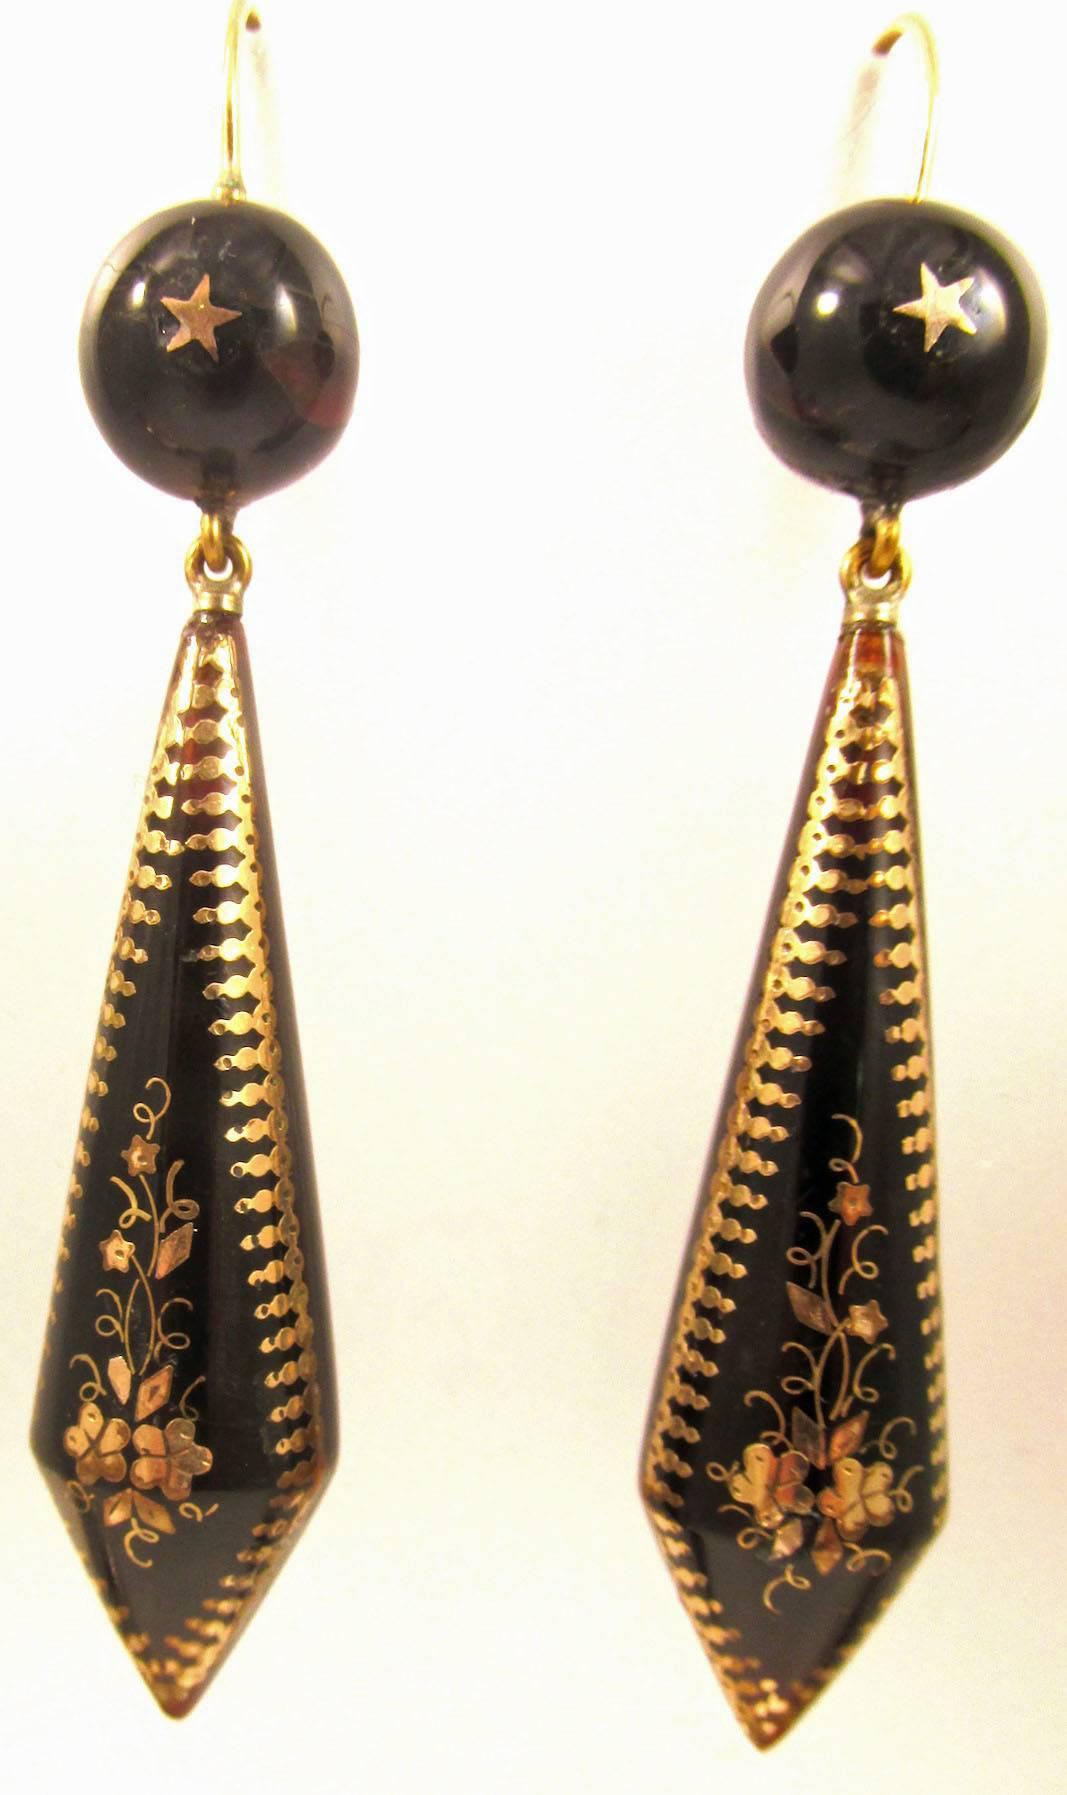 Dramatic Victorian long pique drop earrings set in gold with an intricate floral motif that is topped by a star.  The earrings measure 2 1/2" long by 1/2" at their widest. They date to the 1880"s.